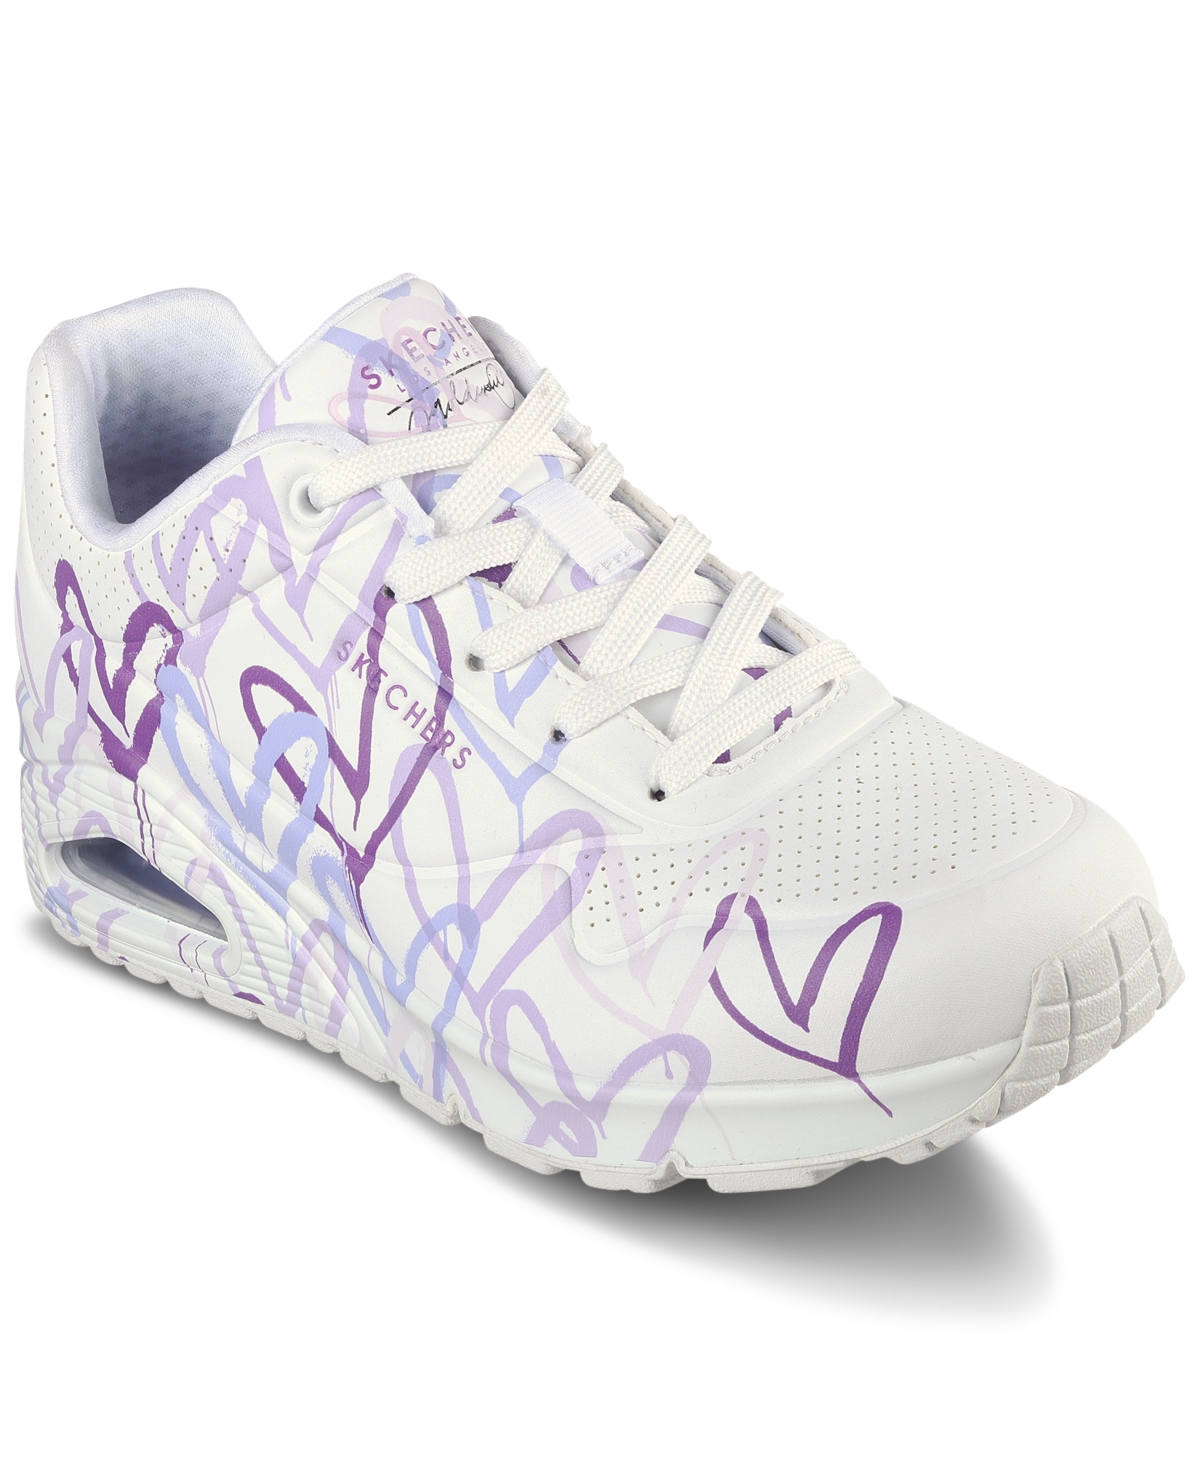 Women's JGoldcrown- Skechers Street Uno - Spread the Love Casual Sneakers from Finish Line - White, Purple